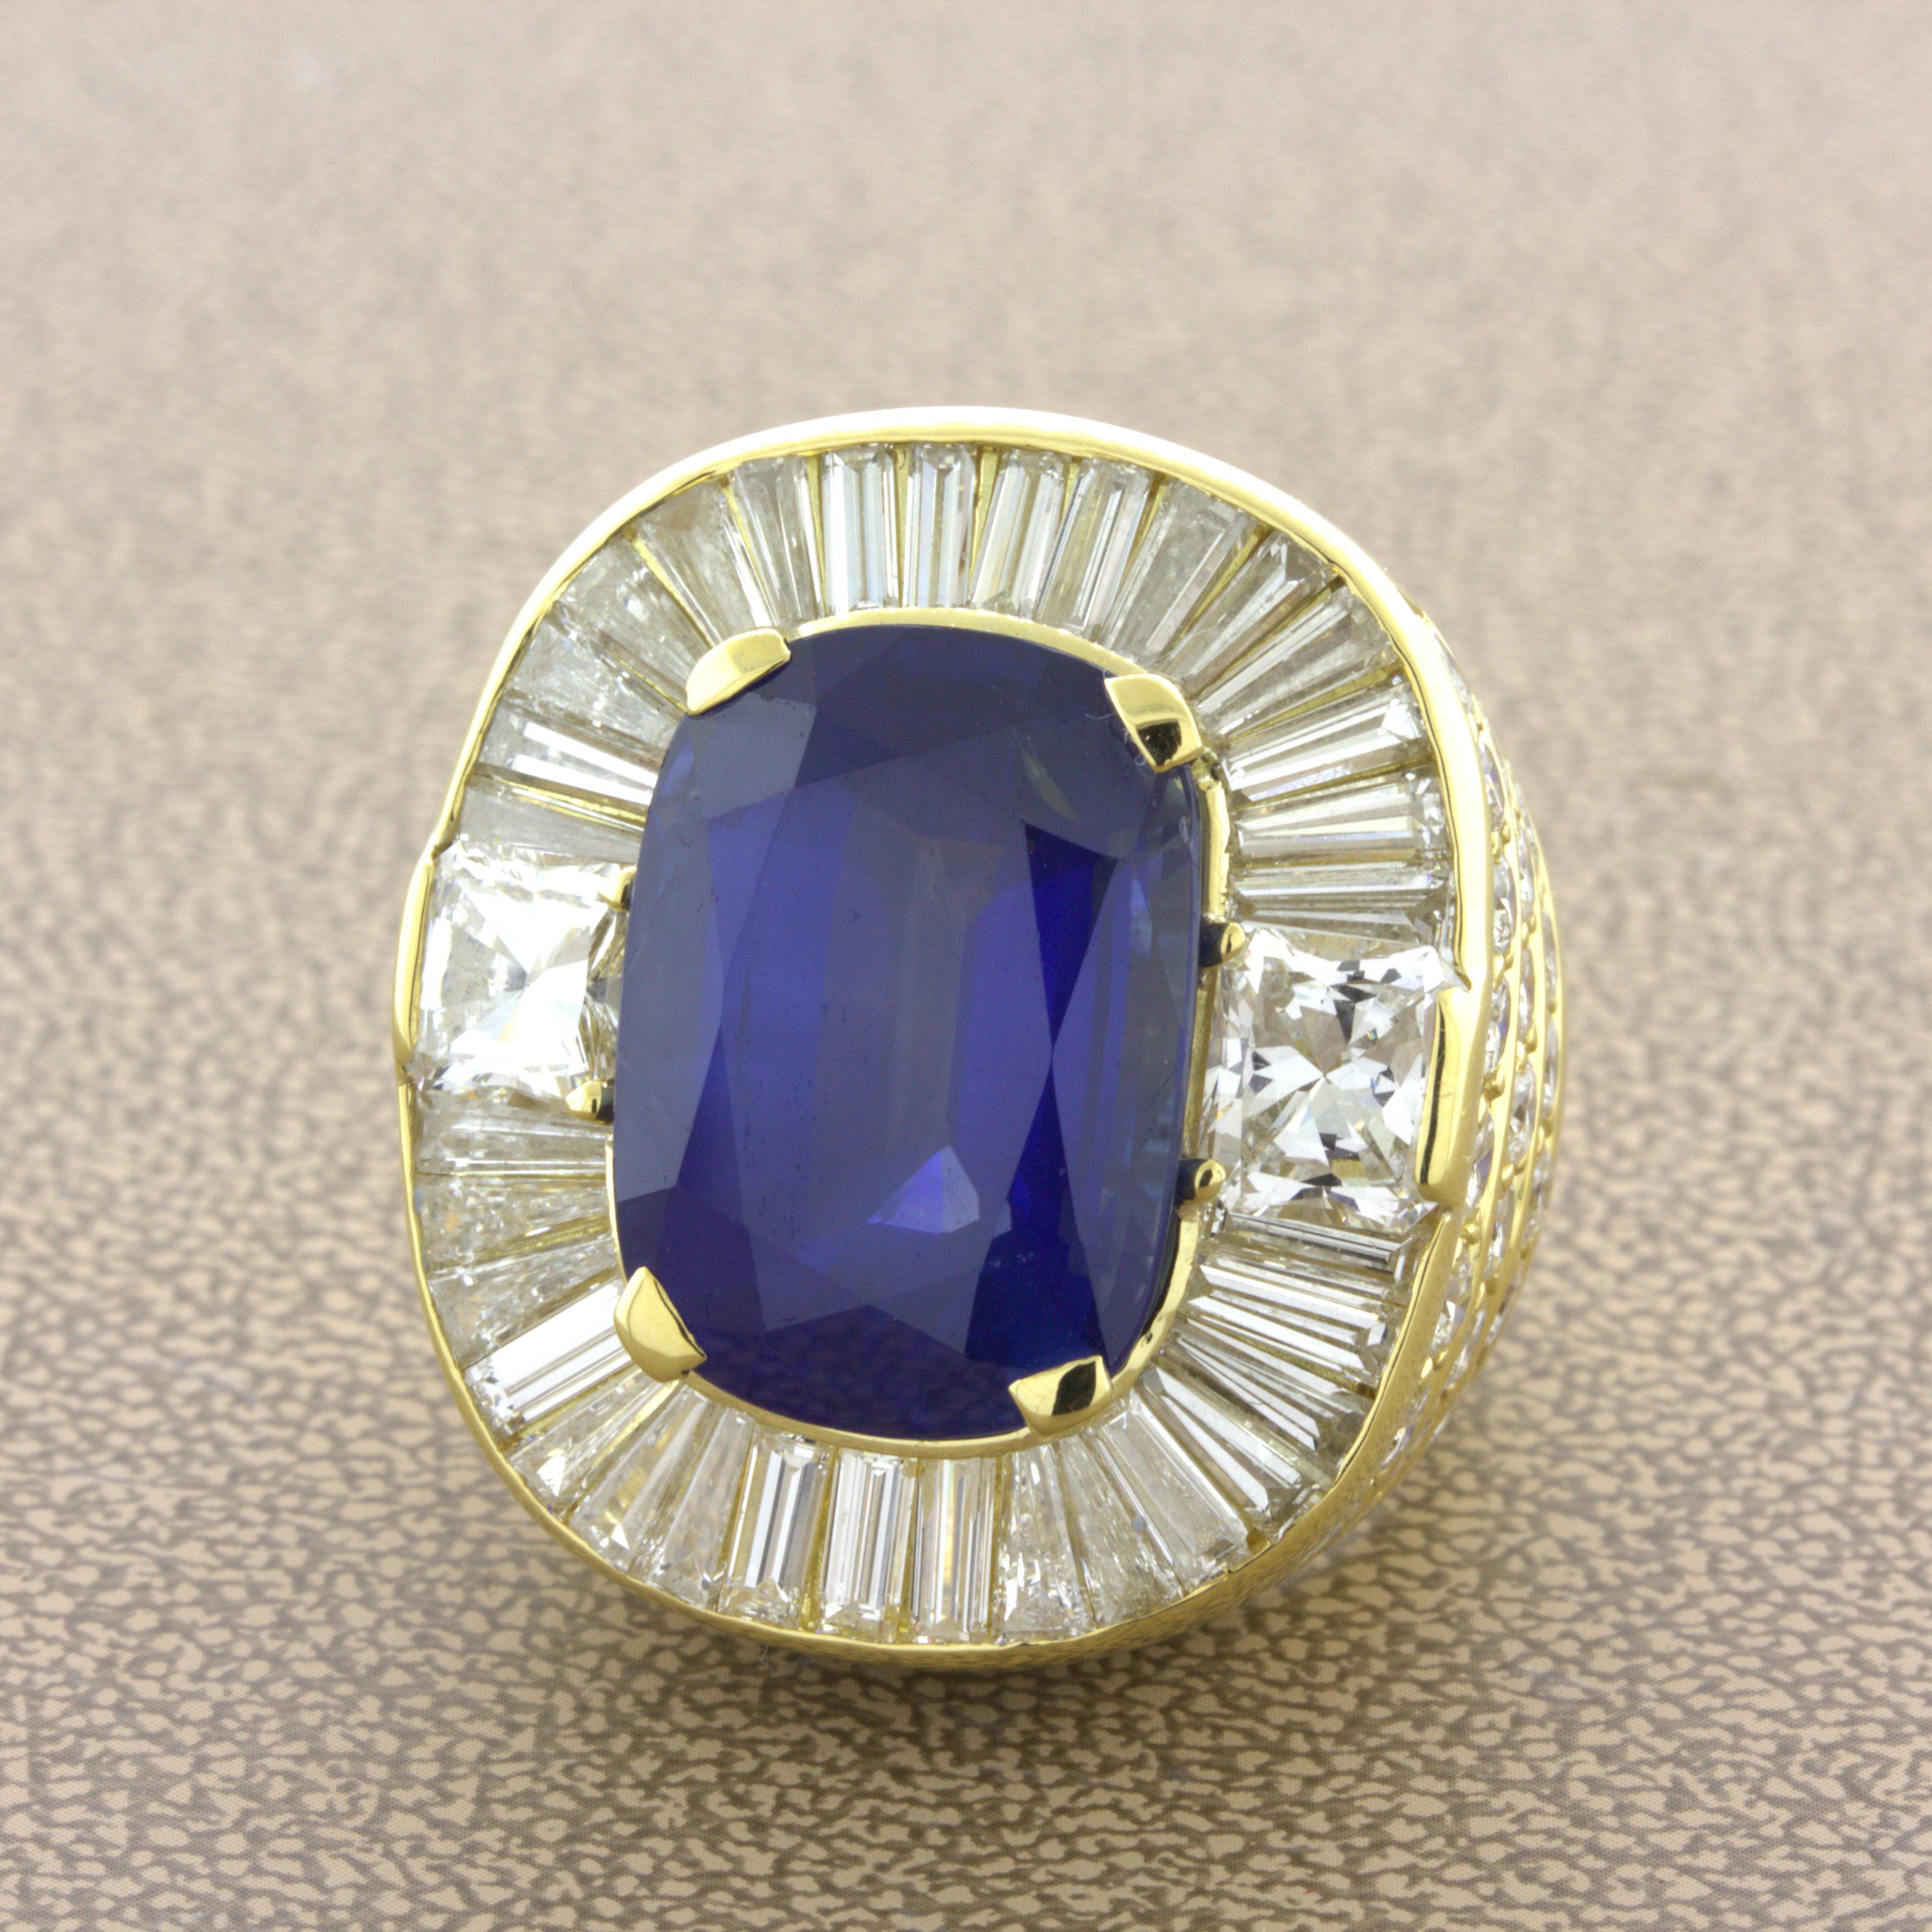 A large and impressive blue Ceylon sapphire takes center stage! It weighs a substantial 19.36 carats and has a rich velvety blue color that glows in the light. As you move the ring you can see flashes of intense blue radiating from the almost 20